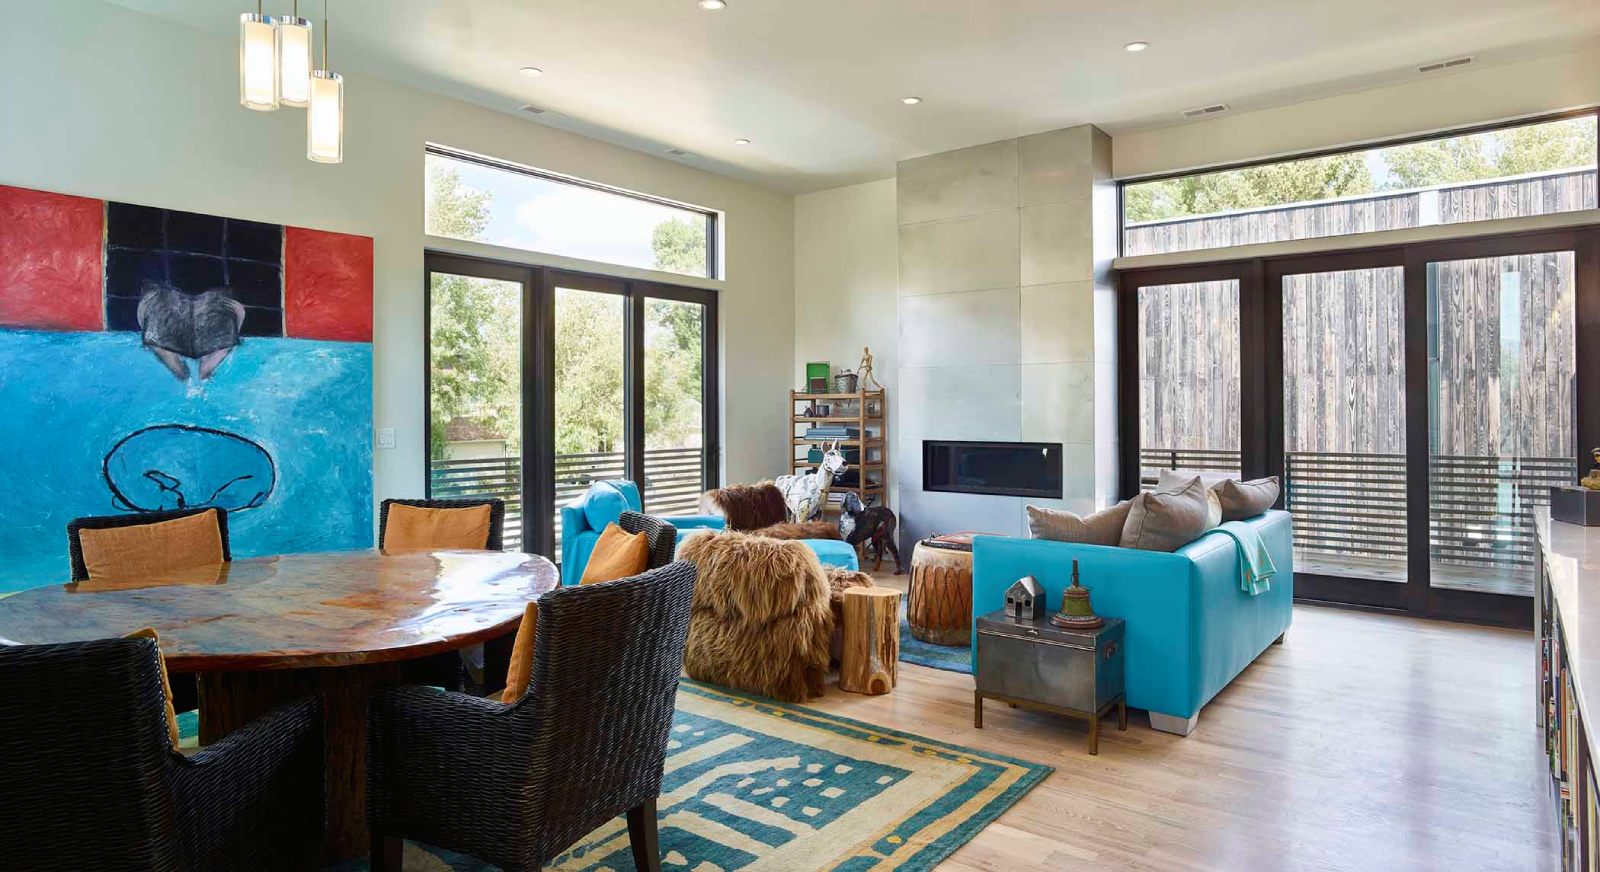 Interior view of the open-plan living room and dining room at West Hansen, a custom home designed and built by Farmer Payne Architects.